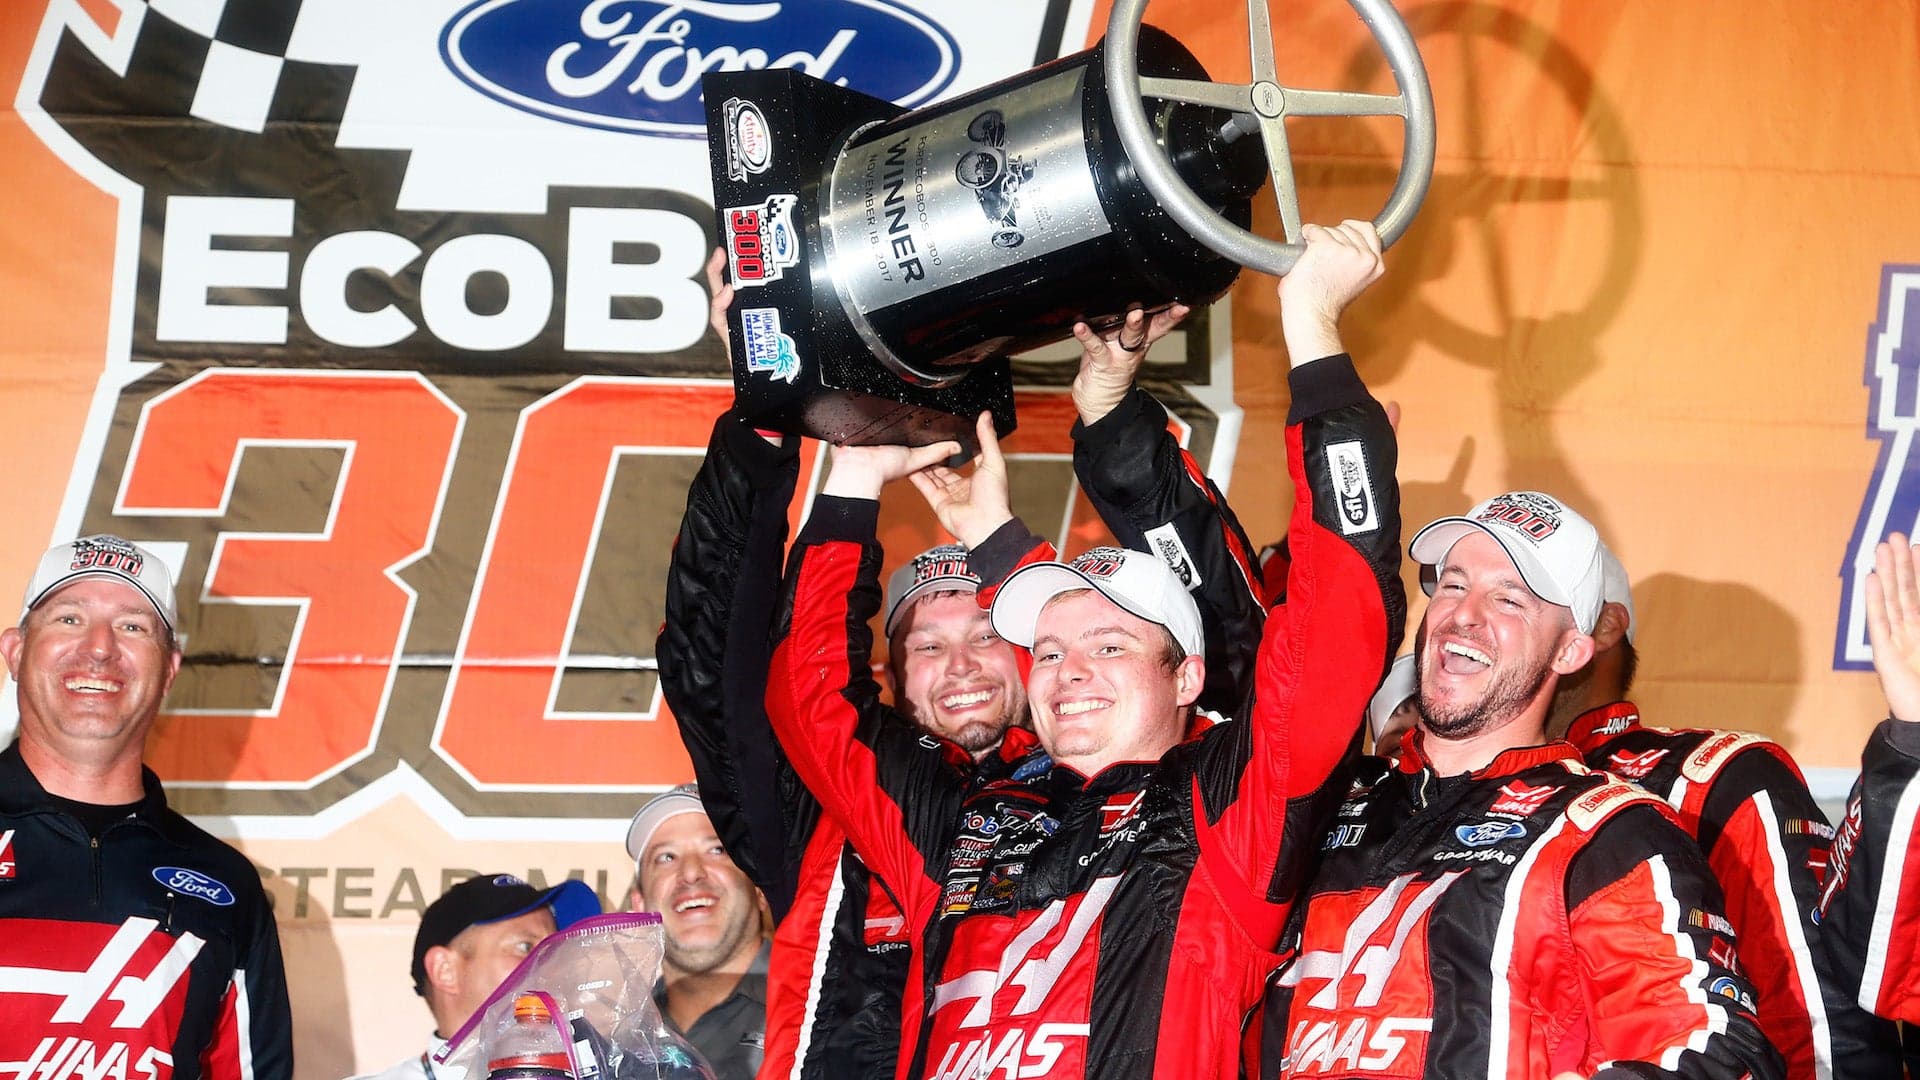 Cole Custer Gets Another Shot at Top-Level NASCAR Racing